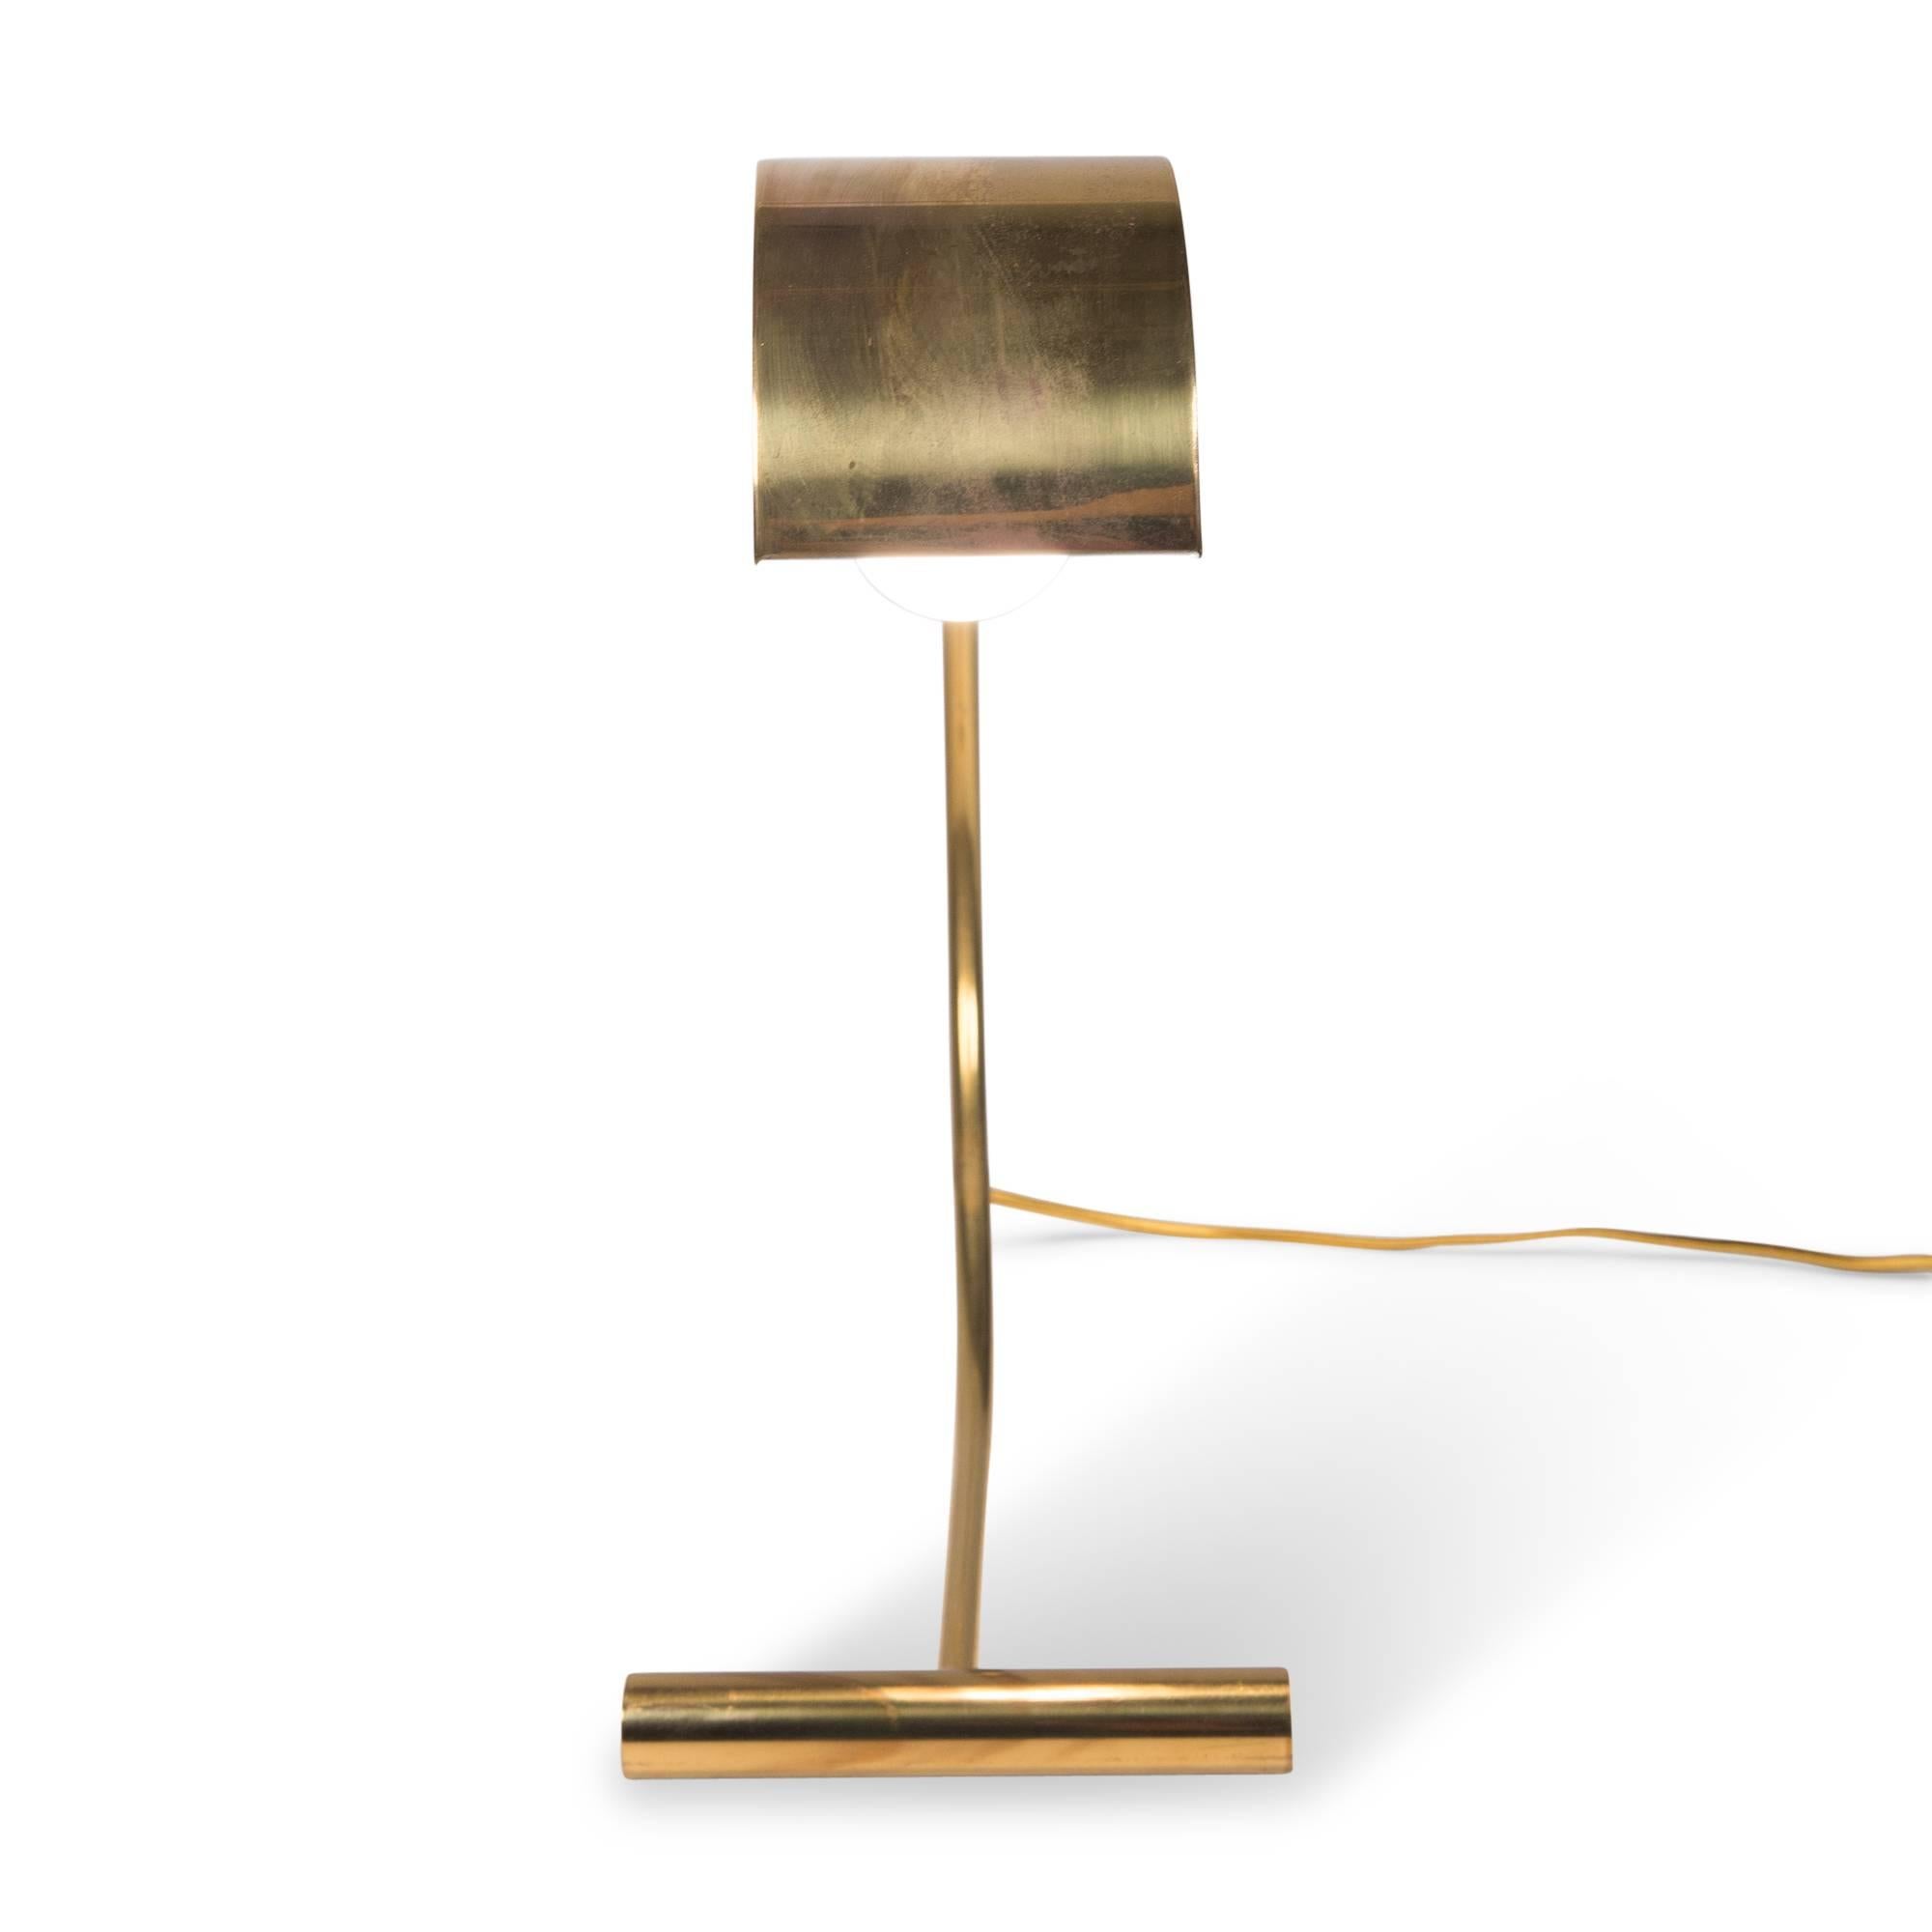 Polished Brass Desk Lamp, American, 1960s For Sale 1